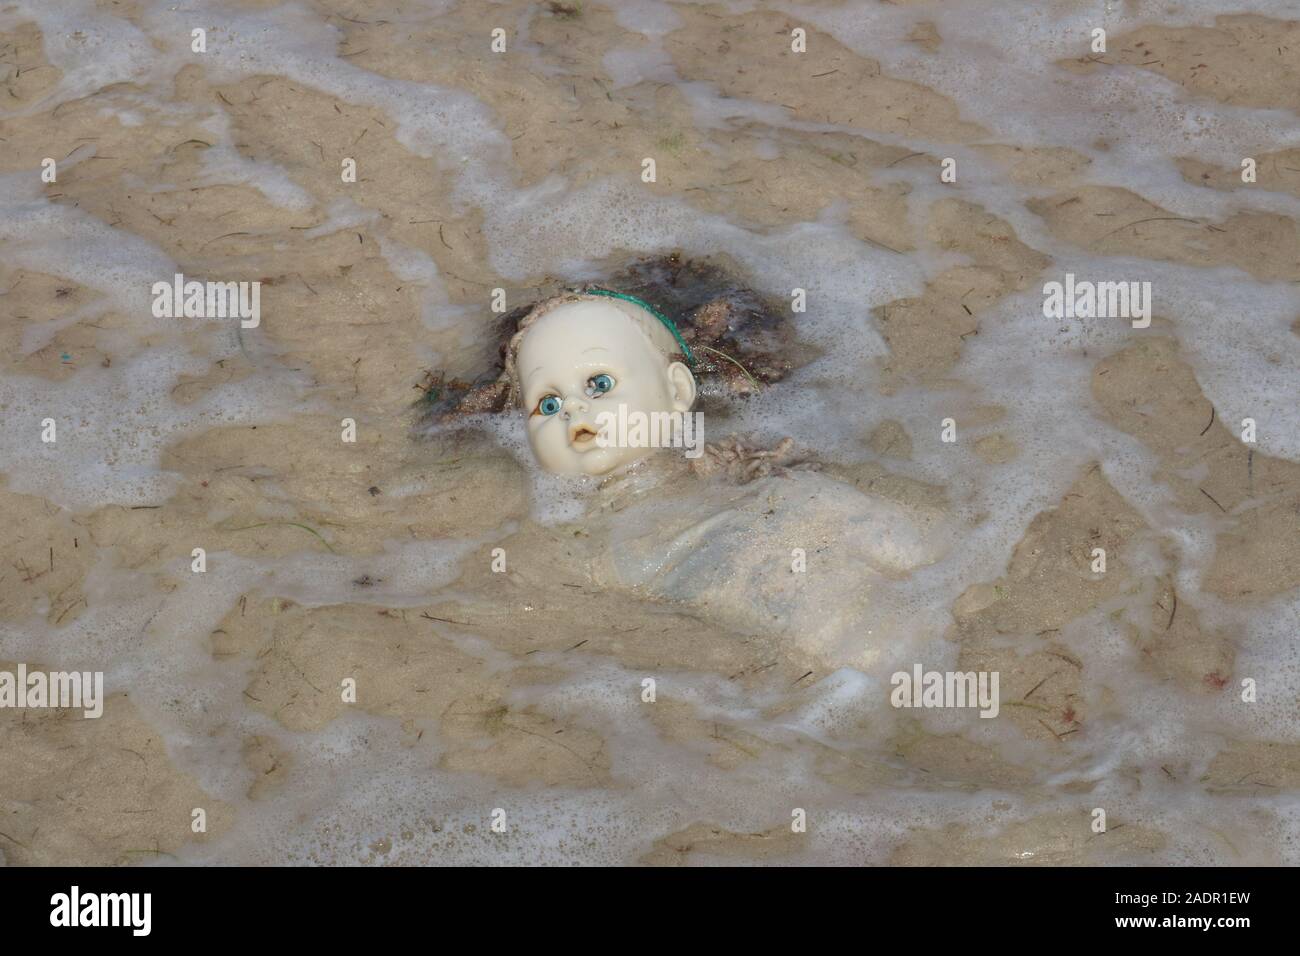 Lost doll on beach drowning in upcoming tide Stock Photo